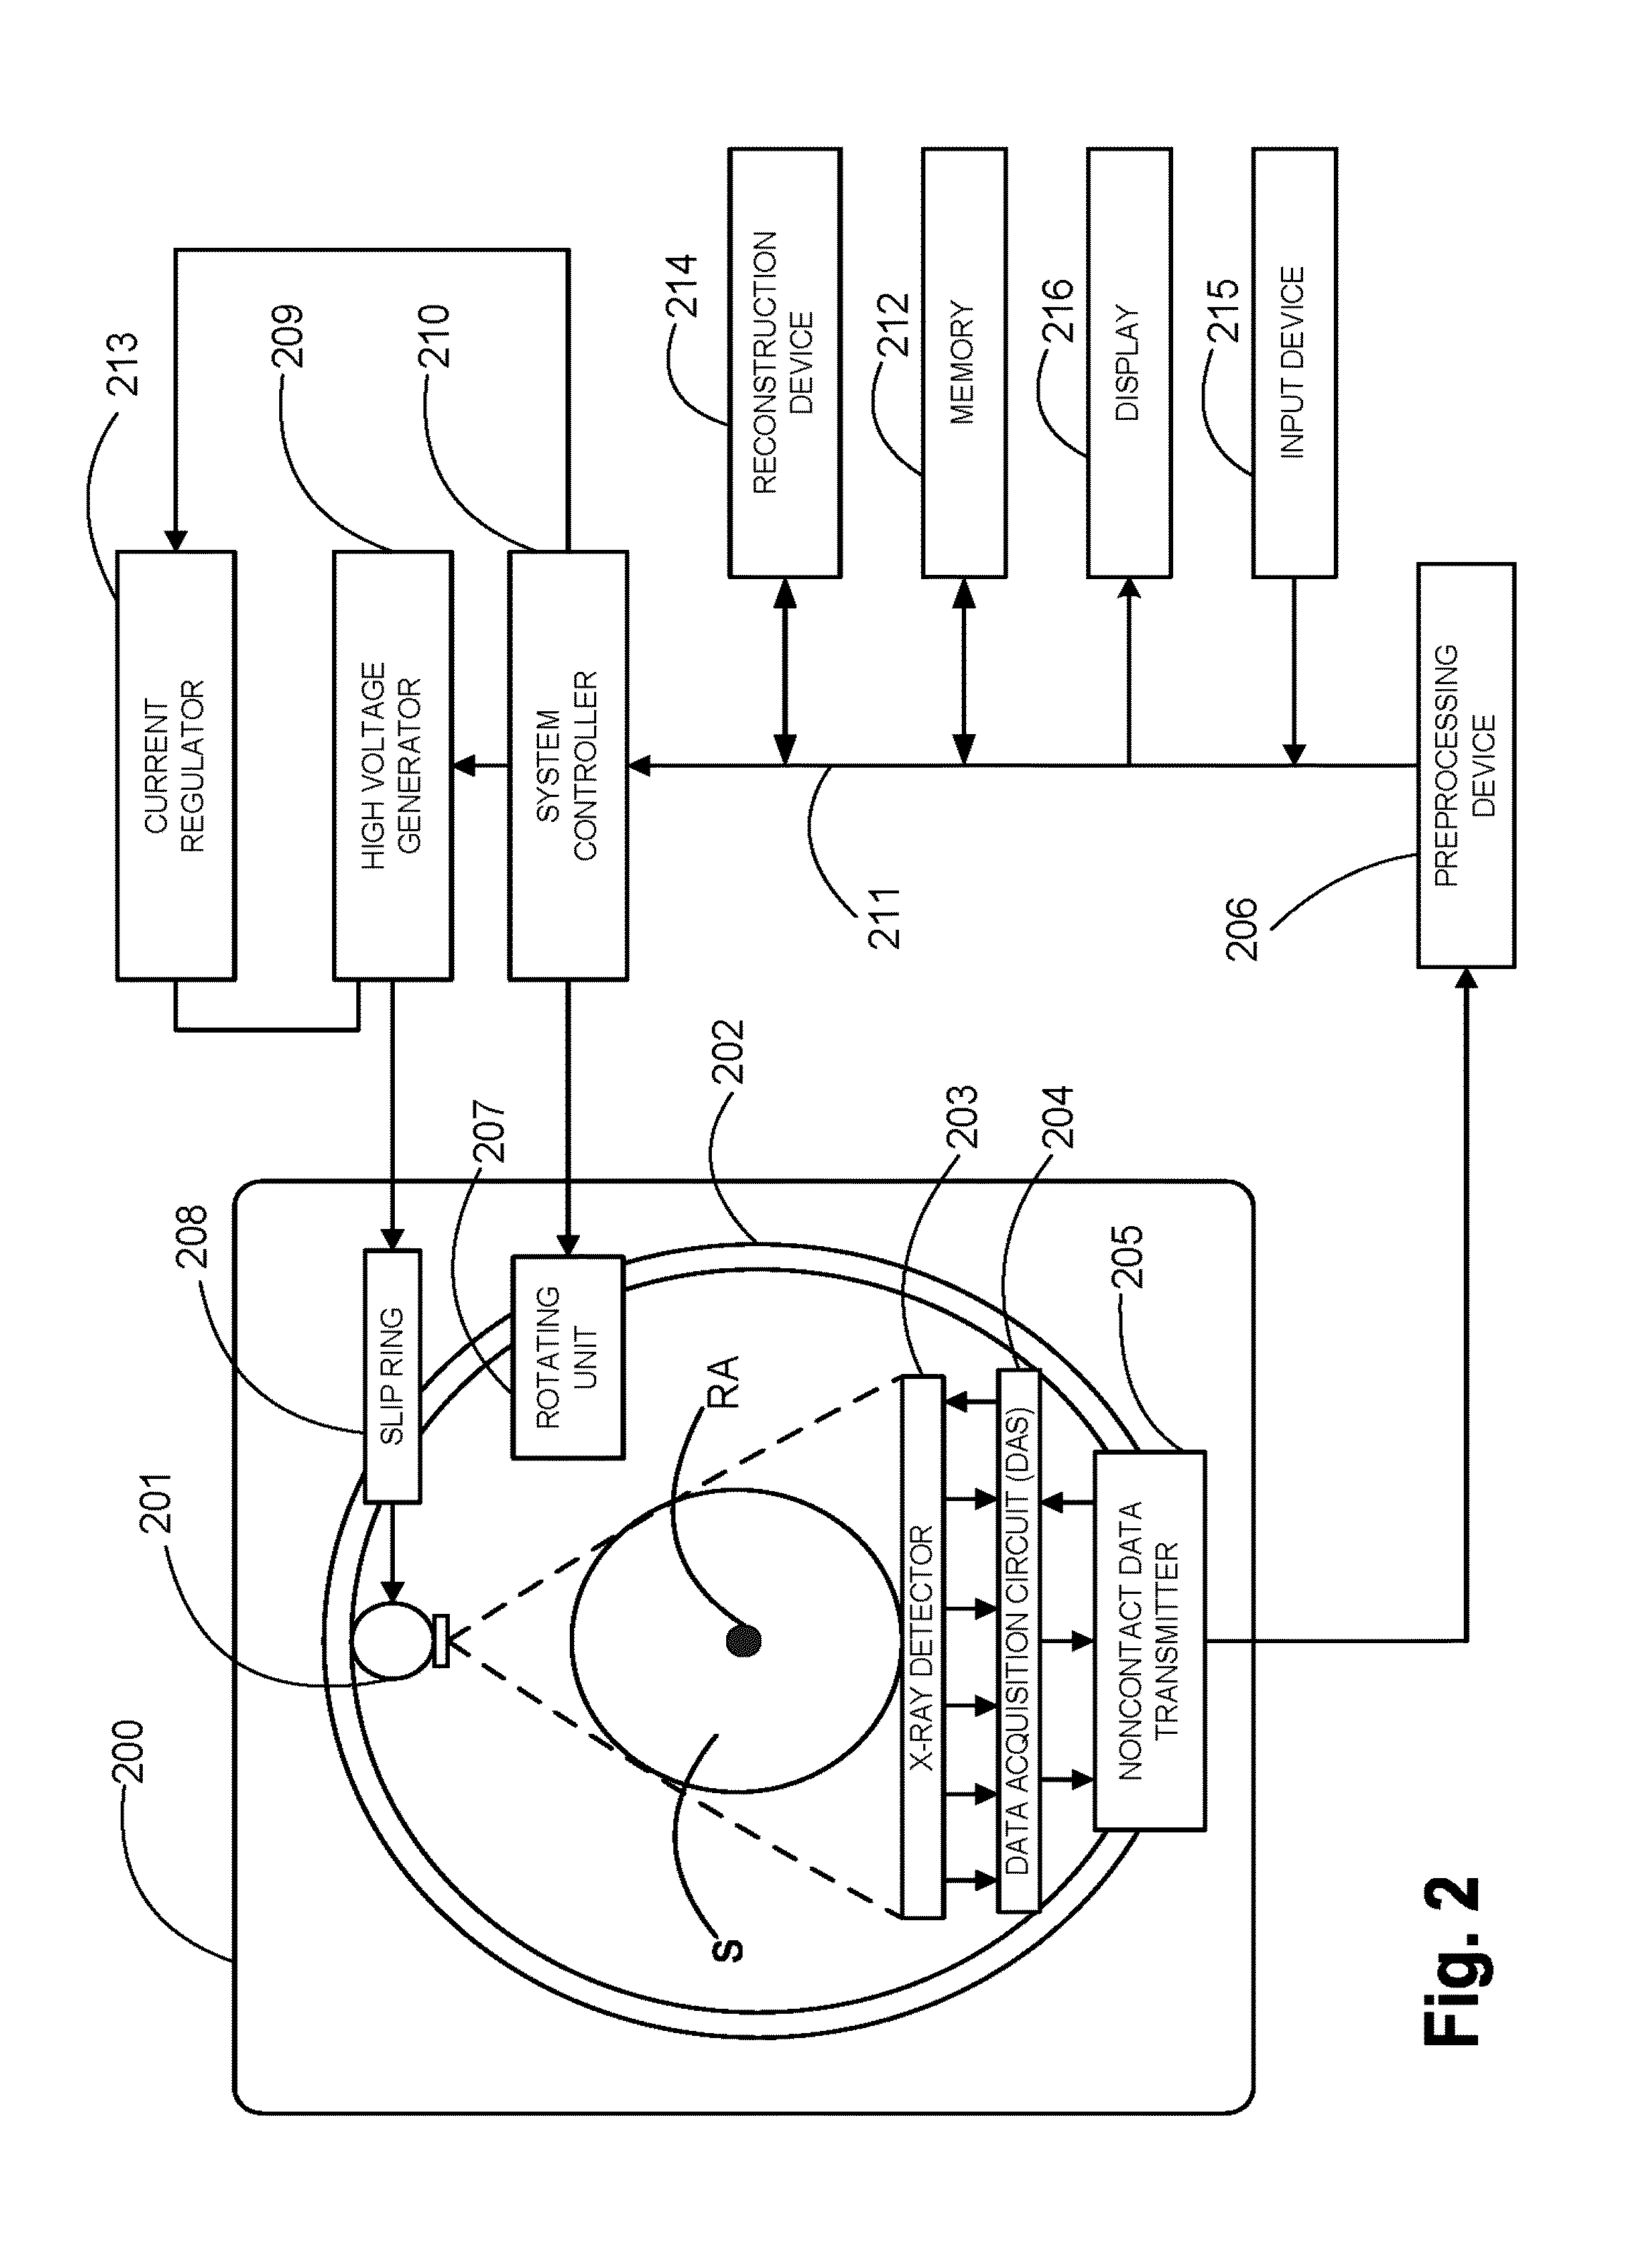 Hybrid passive/active multi-layer energy discriminating photon-counting detector